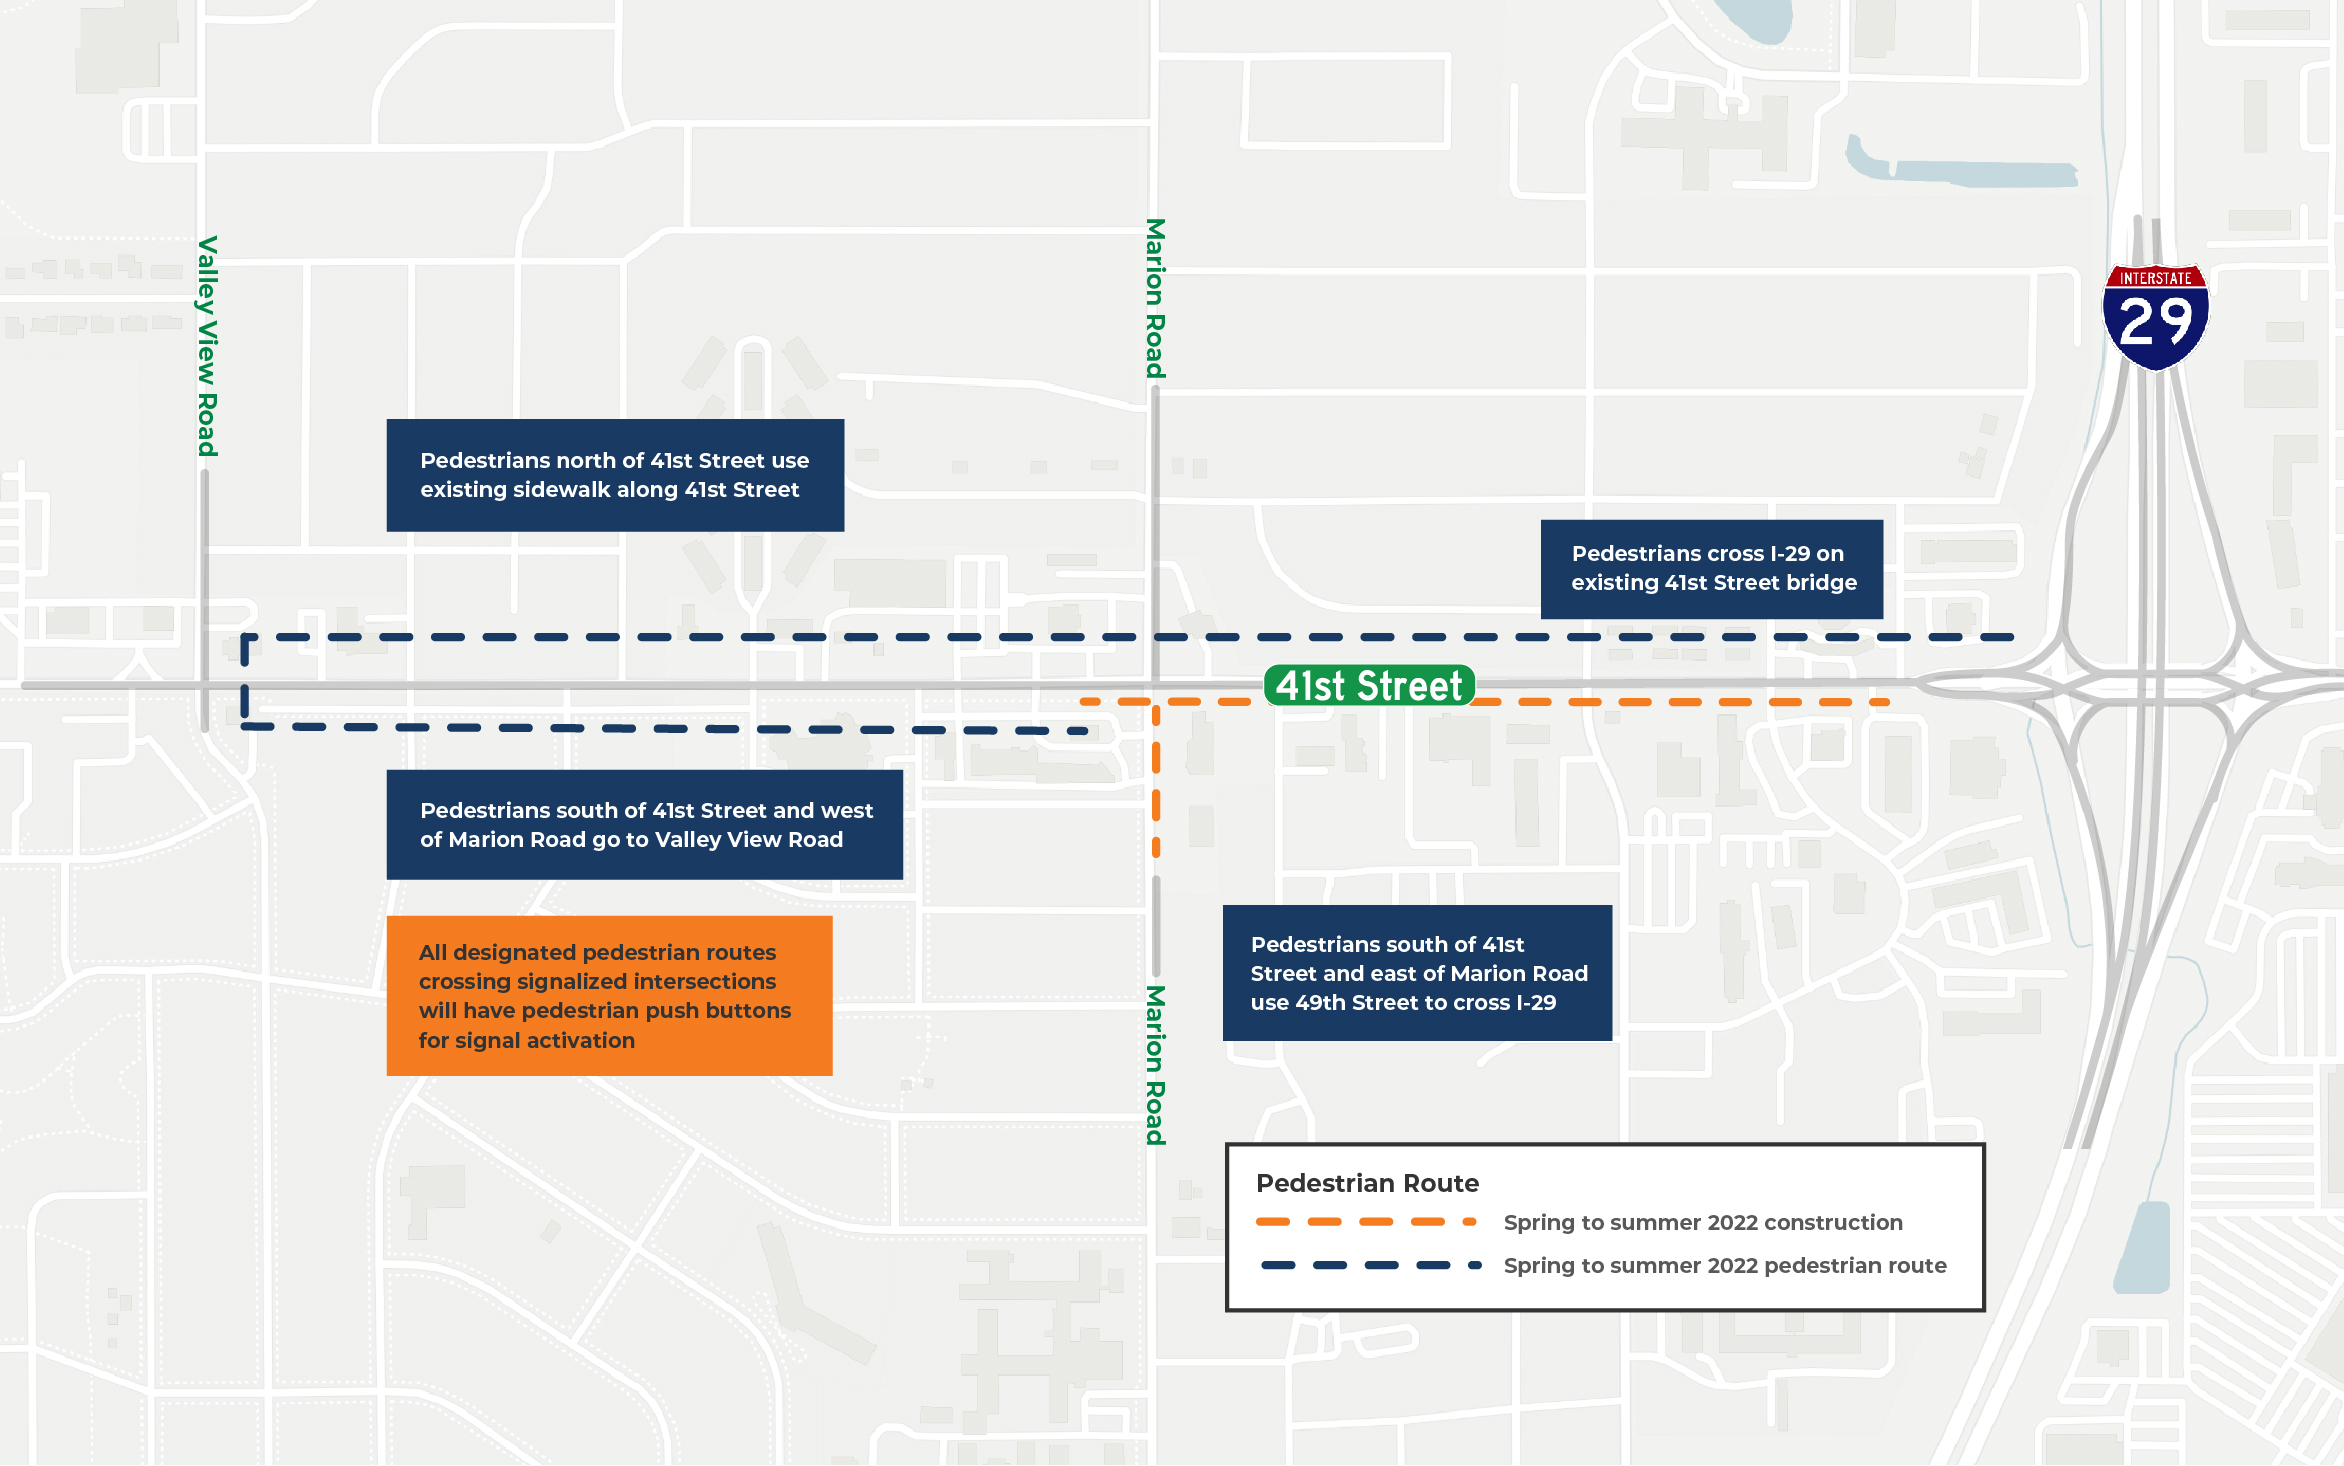 Pedestrian Route Detour map for Spring to Summer 2022